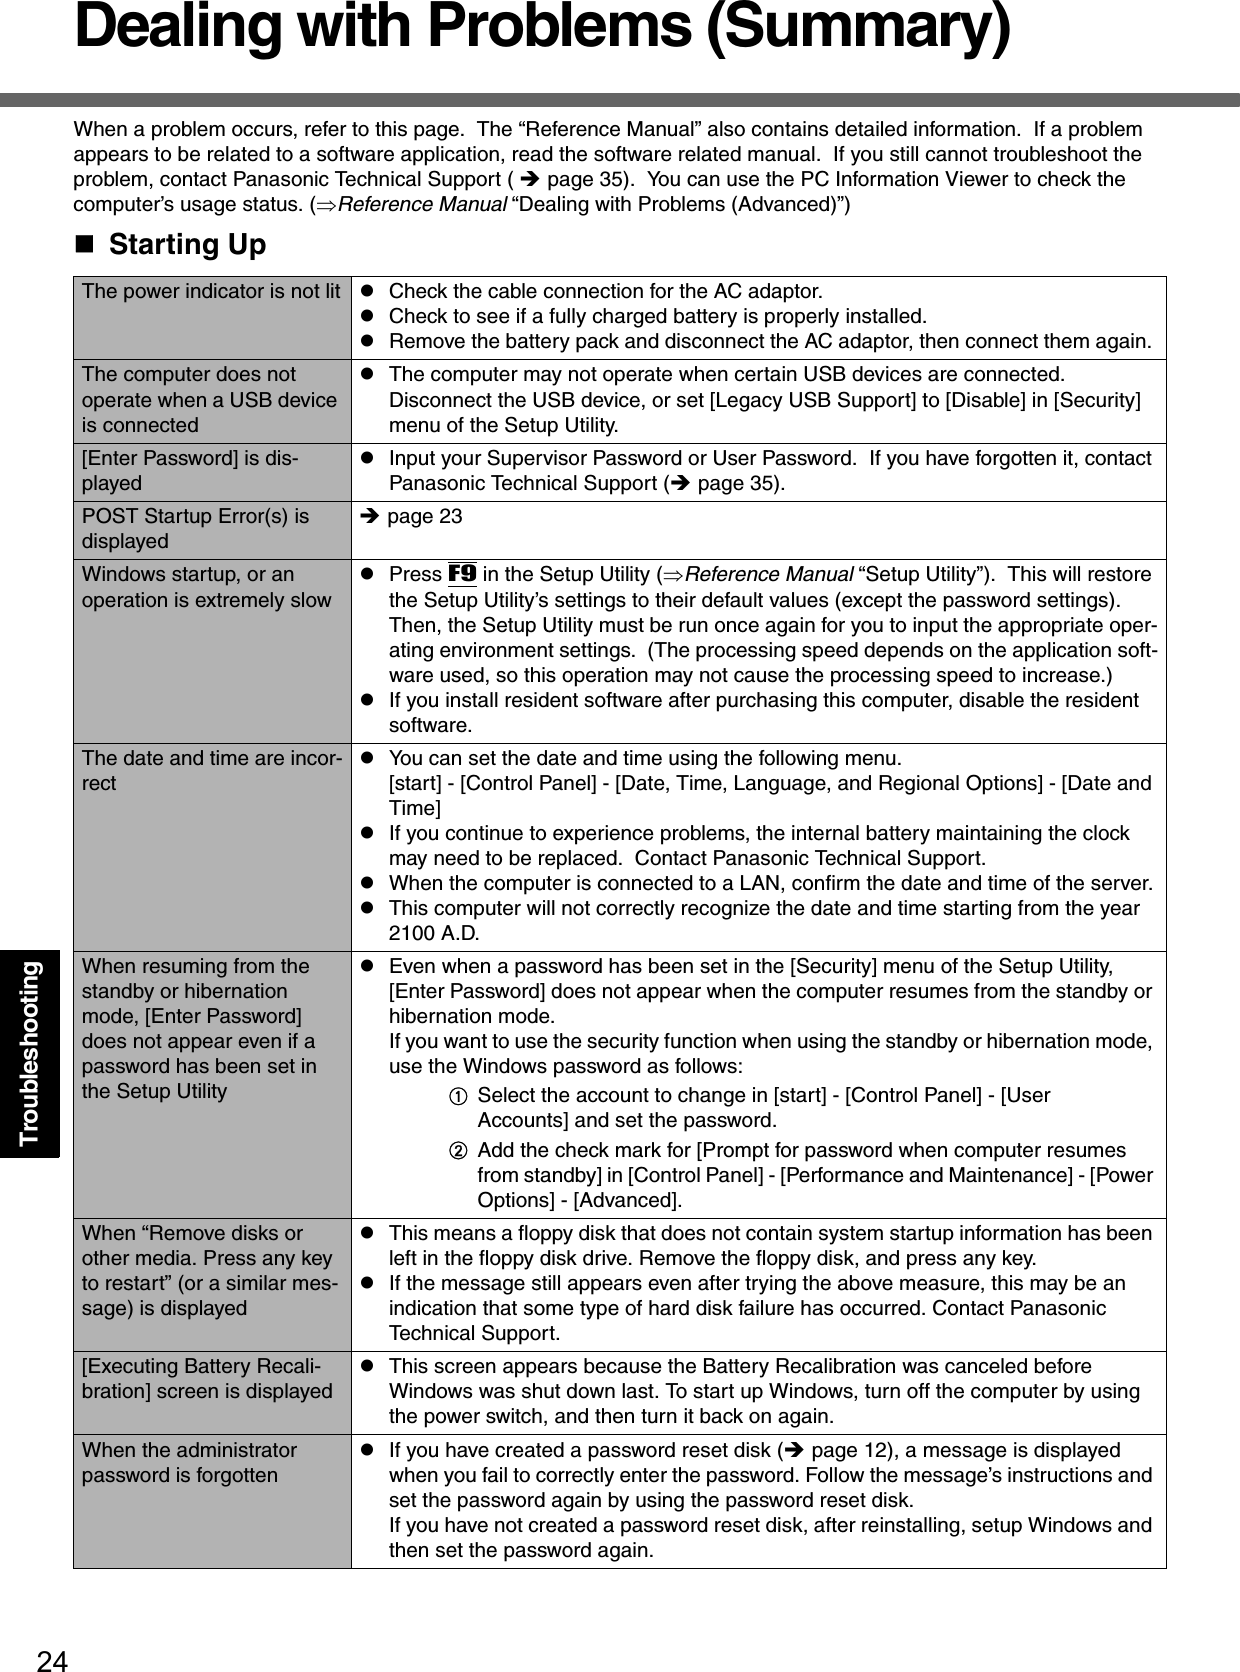 24TroubleshootingDealing with Problems (Summary)When a problem occurs, refer to this page.  The “Reference Manual” also contains detailed information.  If a problem appears to be related to a software application, read the software related manual.  If you still cannot troubleshoot the problem, contact Panasonic Technical Support ( Îpage 35).  You can use the PC Information Viewer to check the computer’s usage status. (⇒Reference Manual “Dealing with Problems (Advanced)”)Starting UpThe power indicator is not lit zCheck the cable connection for the AC adaptor. zCheck to see if a fully charged battery is properly installed.zRemove the battery pack and disconnect the AC adaptor, then connect them again. The computer does not operate when a USB device is connectedzThe computer may not operate when certain USB devices are connected. Disconnect the USB device, or set [Legacy USB Support] to [Disable] in [Security] menu of the Setup Utility.[Enter Password] is dis-playedzInput your Supervisor Password or User Password.  If you have forgotten it, contact Panasonic Technical Support (Îpage 35).POST Startup Error(s) is displayedÎpage 23Windows startup, or an operation is extremely slowzPress F9 in the Setup Utility (⇒Reference Manual “Setup Utility”).  This will restore the Setup Utility’s settings to their default values (except the password settings).  Then, the Setup Utility must be run once again for you to input the appropriate oper-ating environment settings.  (The processing speed depends on the application soft-ware used, so this operation may not cause the processing speed to increase.)zIf you install resident software after purchasing this computer, disable the resident software.The date and time are incor-rectzYou can set the date and time using the following menu.[start] - [Control Panel] - [Date, Time, Language, and Regional Options] - [Date and Time]zIf you continue to experience problems, the internal battery maintaining the clock may need to be replaced.  Contact Panasonic Technical Support.zWhen the computer is connected to a LAN, confirm the date and time of the server.zThis computer will not correctly recognize the date and time starting from the year 2100 A.D.When resuming from the standby or hibernation mode, [Enter Password] does not appear even if a password has been set in the Setup UtilityzEven when a password has been set in the [Security] menu of the Setup Utility, [Enter Password] does not appear when the computer resumes from the standby or hibernation mode.If you want to use the security function when using the standby or hibernation mode, use the Windows password as follows:ASelect the account to change in [start] - [Control Panel] - [User Accounts] and set the password.BAdd the check mark for [Prompt for password when computer resumes from standby] in [Control Panel] - [Performance and Maintenance] - [Power Options] - [Advanced].When “Remove disks or other media. Press any key to restart” (or a similar mes-sage) is displayedzThis means a floppy disk that does not contain system startup information has been left in the floppy disk drive. Remove the floppy disk, and press any key.zIf the message still appears even after trying the above measure, this may be an indication that some type of hard disk failure has occurred. Contact Panasonic Technical Support.[Executing Battery Recali-bration] screen is displayedzThis screen appears because the Battery Recalibration was canceled before Windows was shut down last. To start up Windows, turn off the computer by using the power switch, and then turn it back on again.When the administrator password is forgottenzIf you have created a password reset disk (Îpage 12), a message is displayed when you fail to correctly enter the password. Follow the message’s instructions and set the password again by using the password reset disk.If you have not created a password reset disk, after reinstalling, setup Windows and then set the password again.